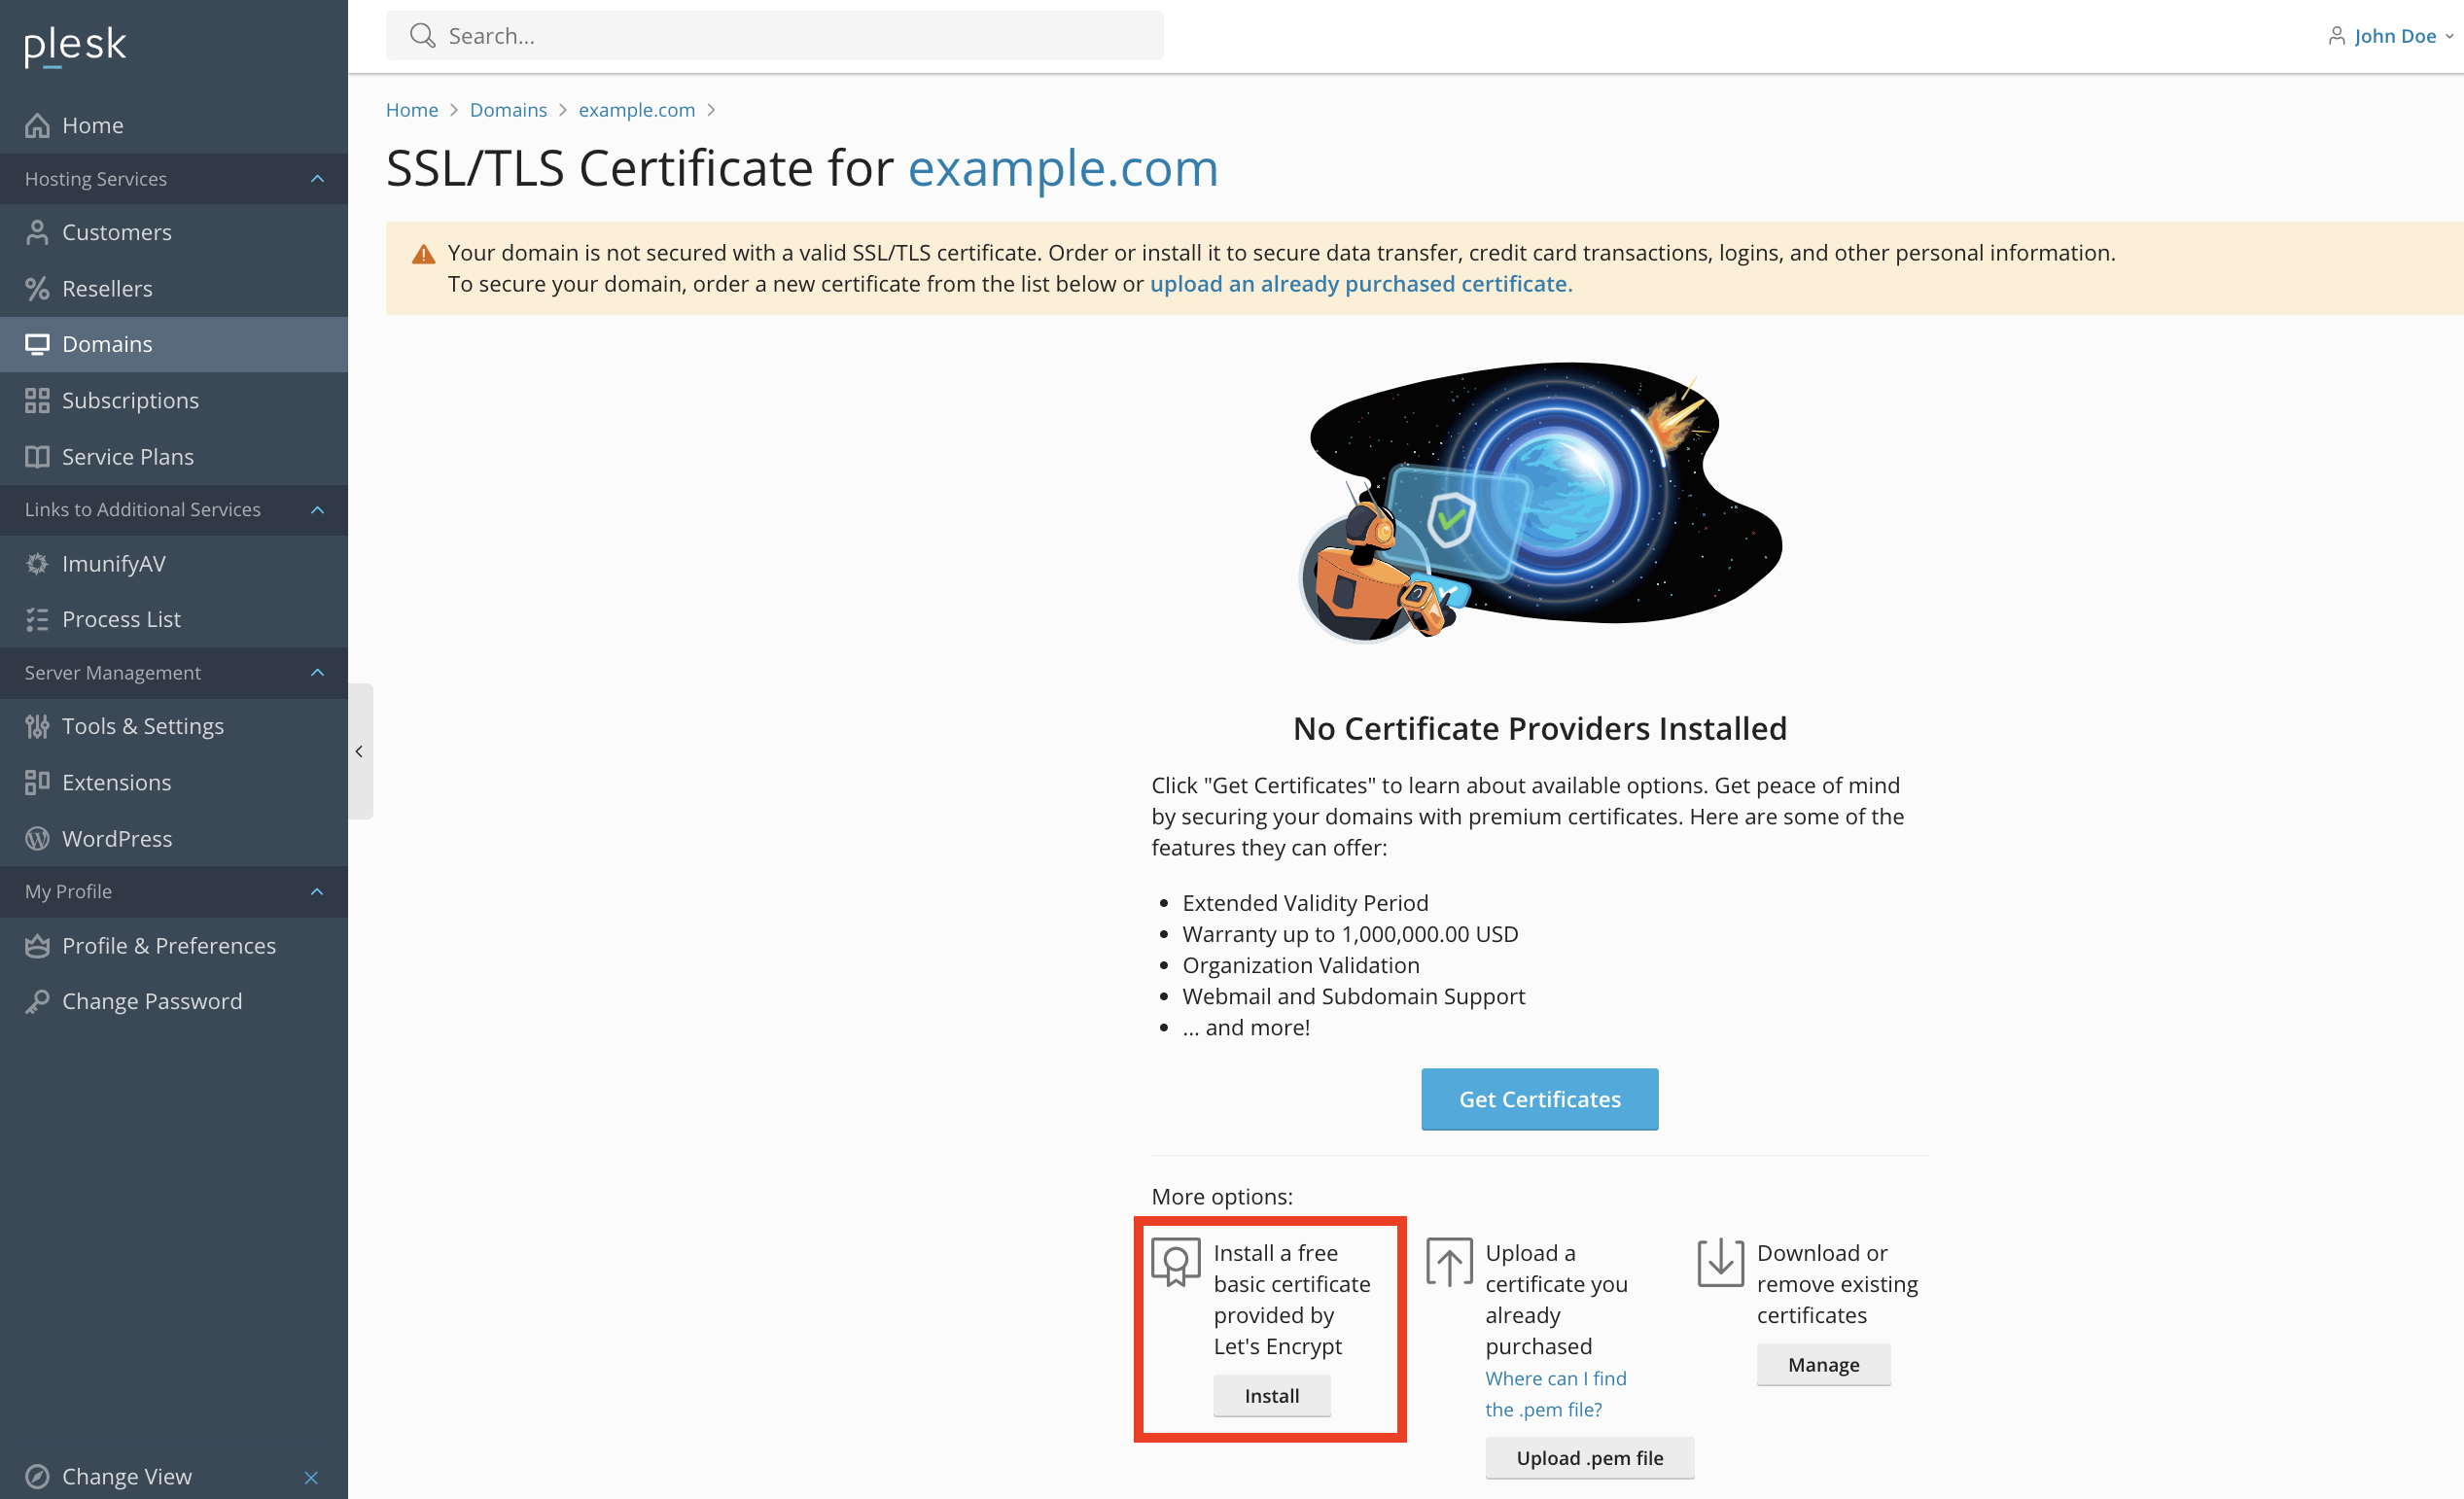 Install Let's Encrypt certificate button